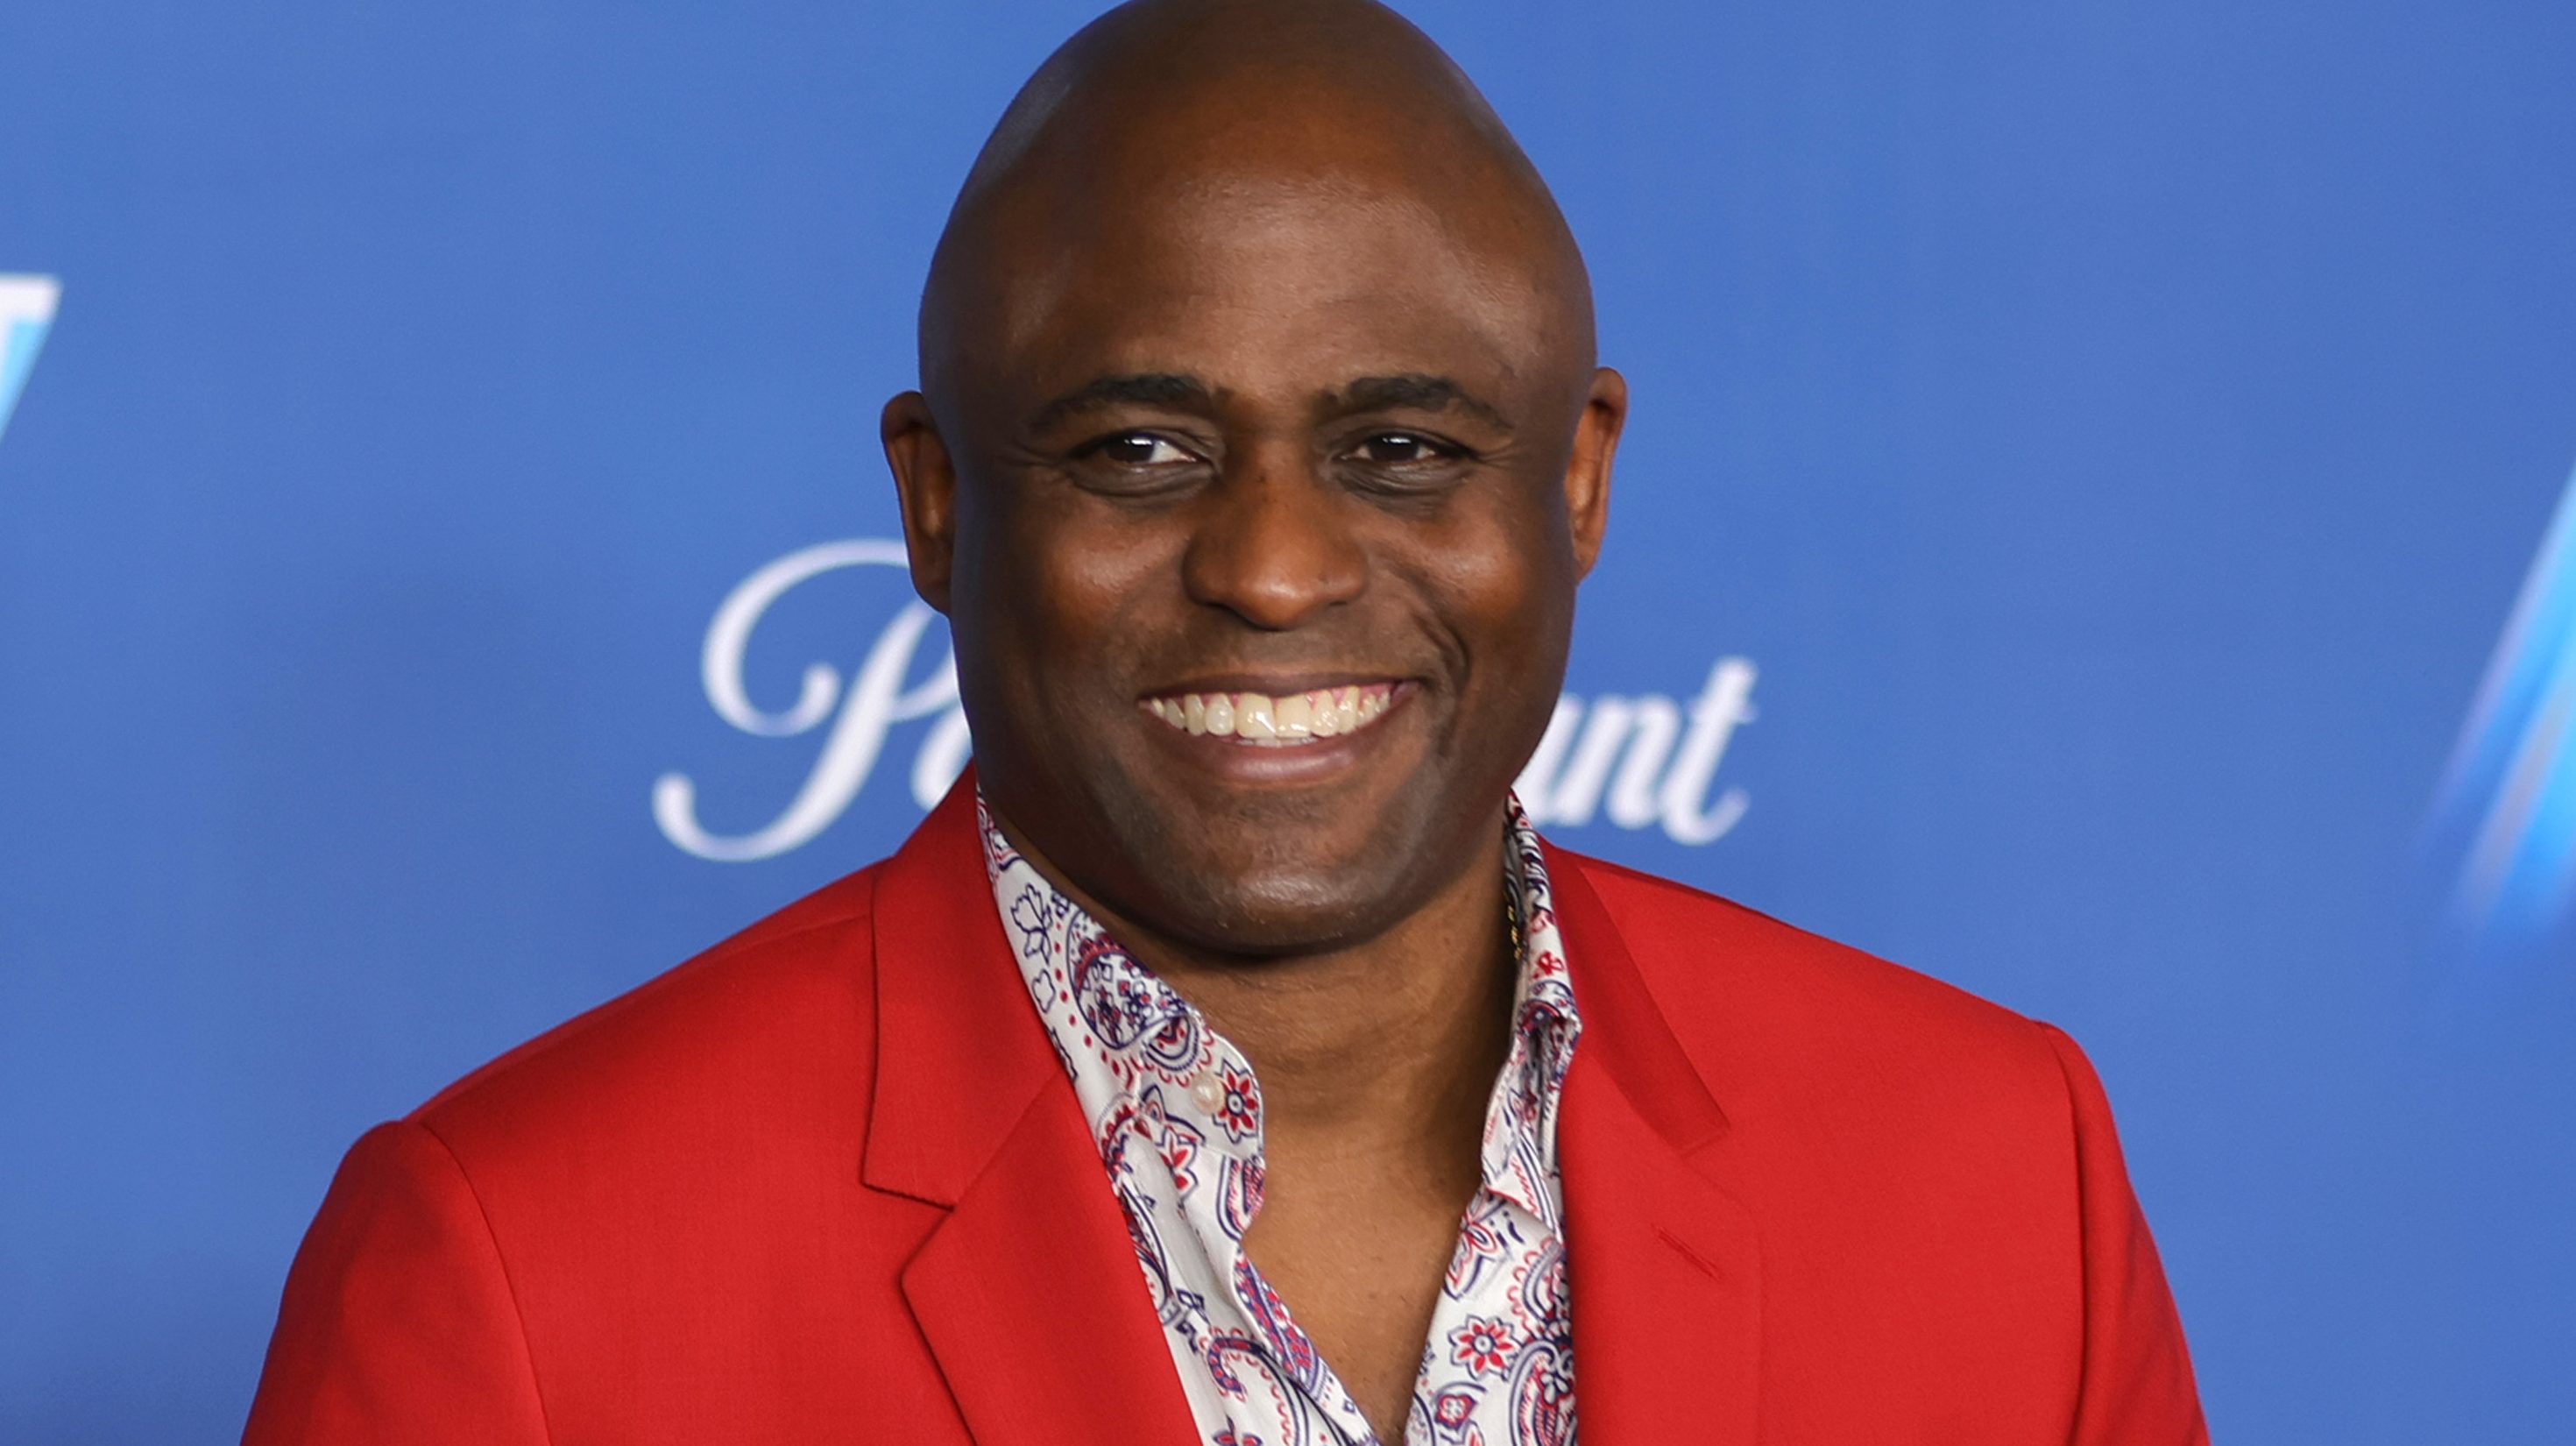 Who Are Wayne Brady's Parents? Does He Have Any Kids?